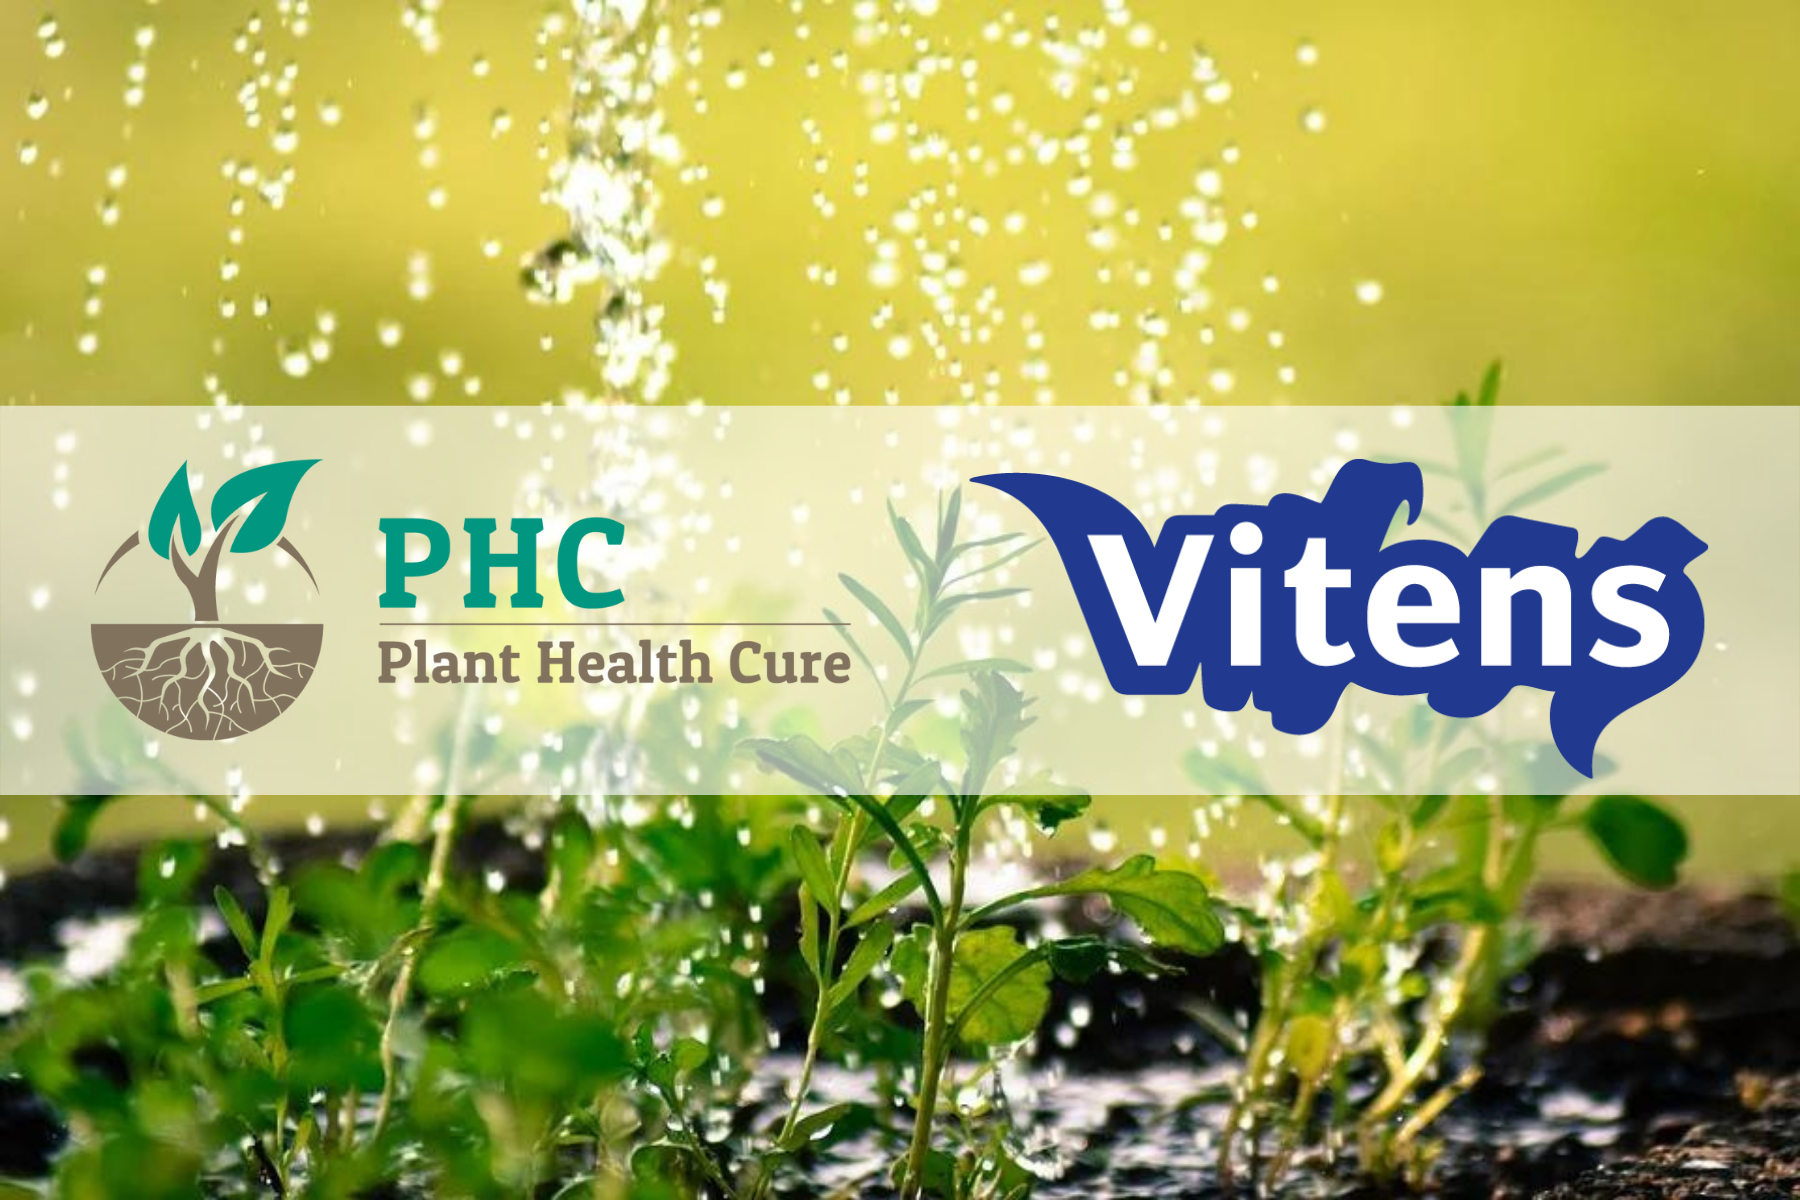 PHC and Vitens join forces to improve Dutch soil, groundwater and crop quality